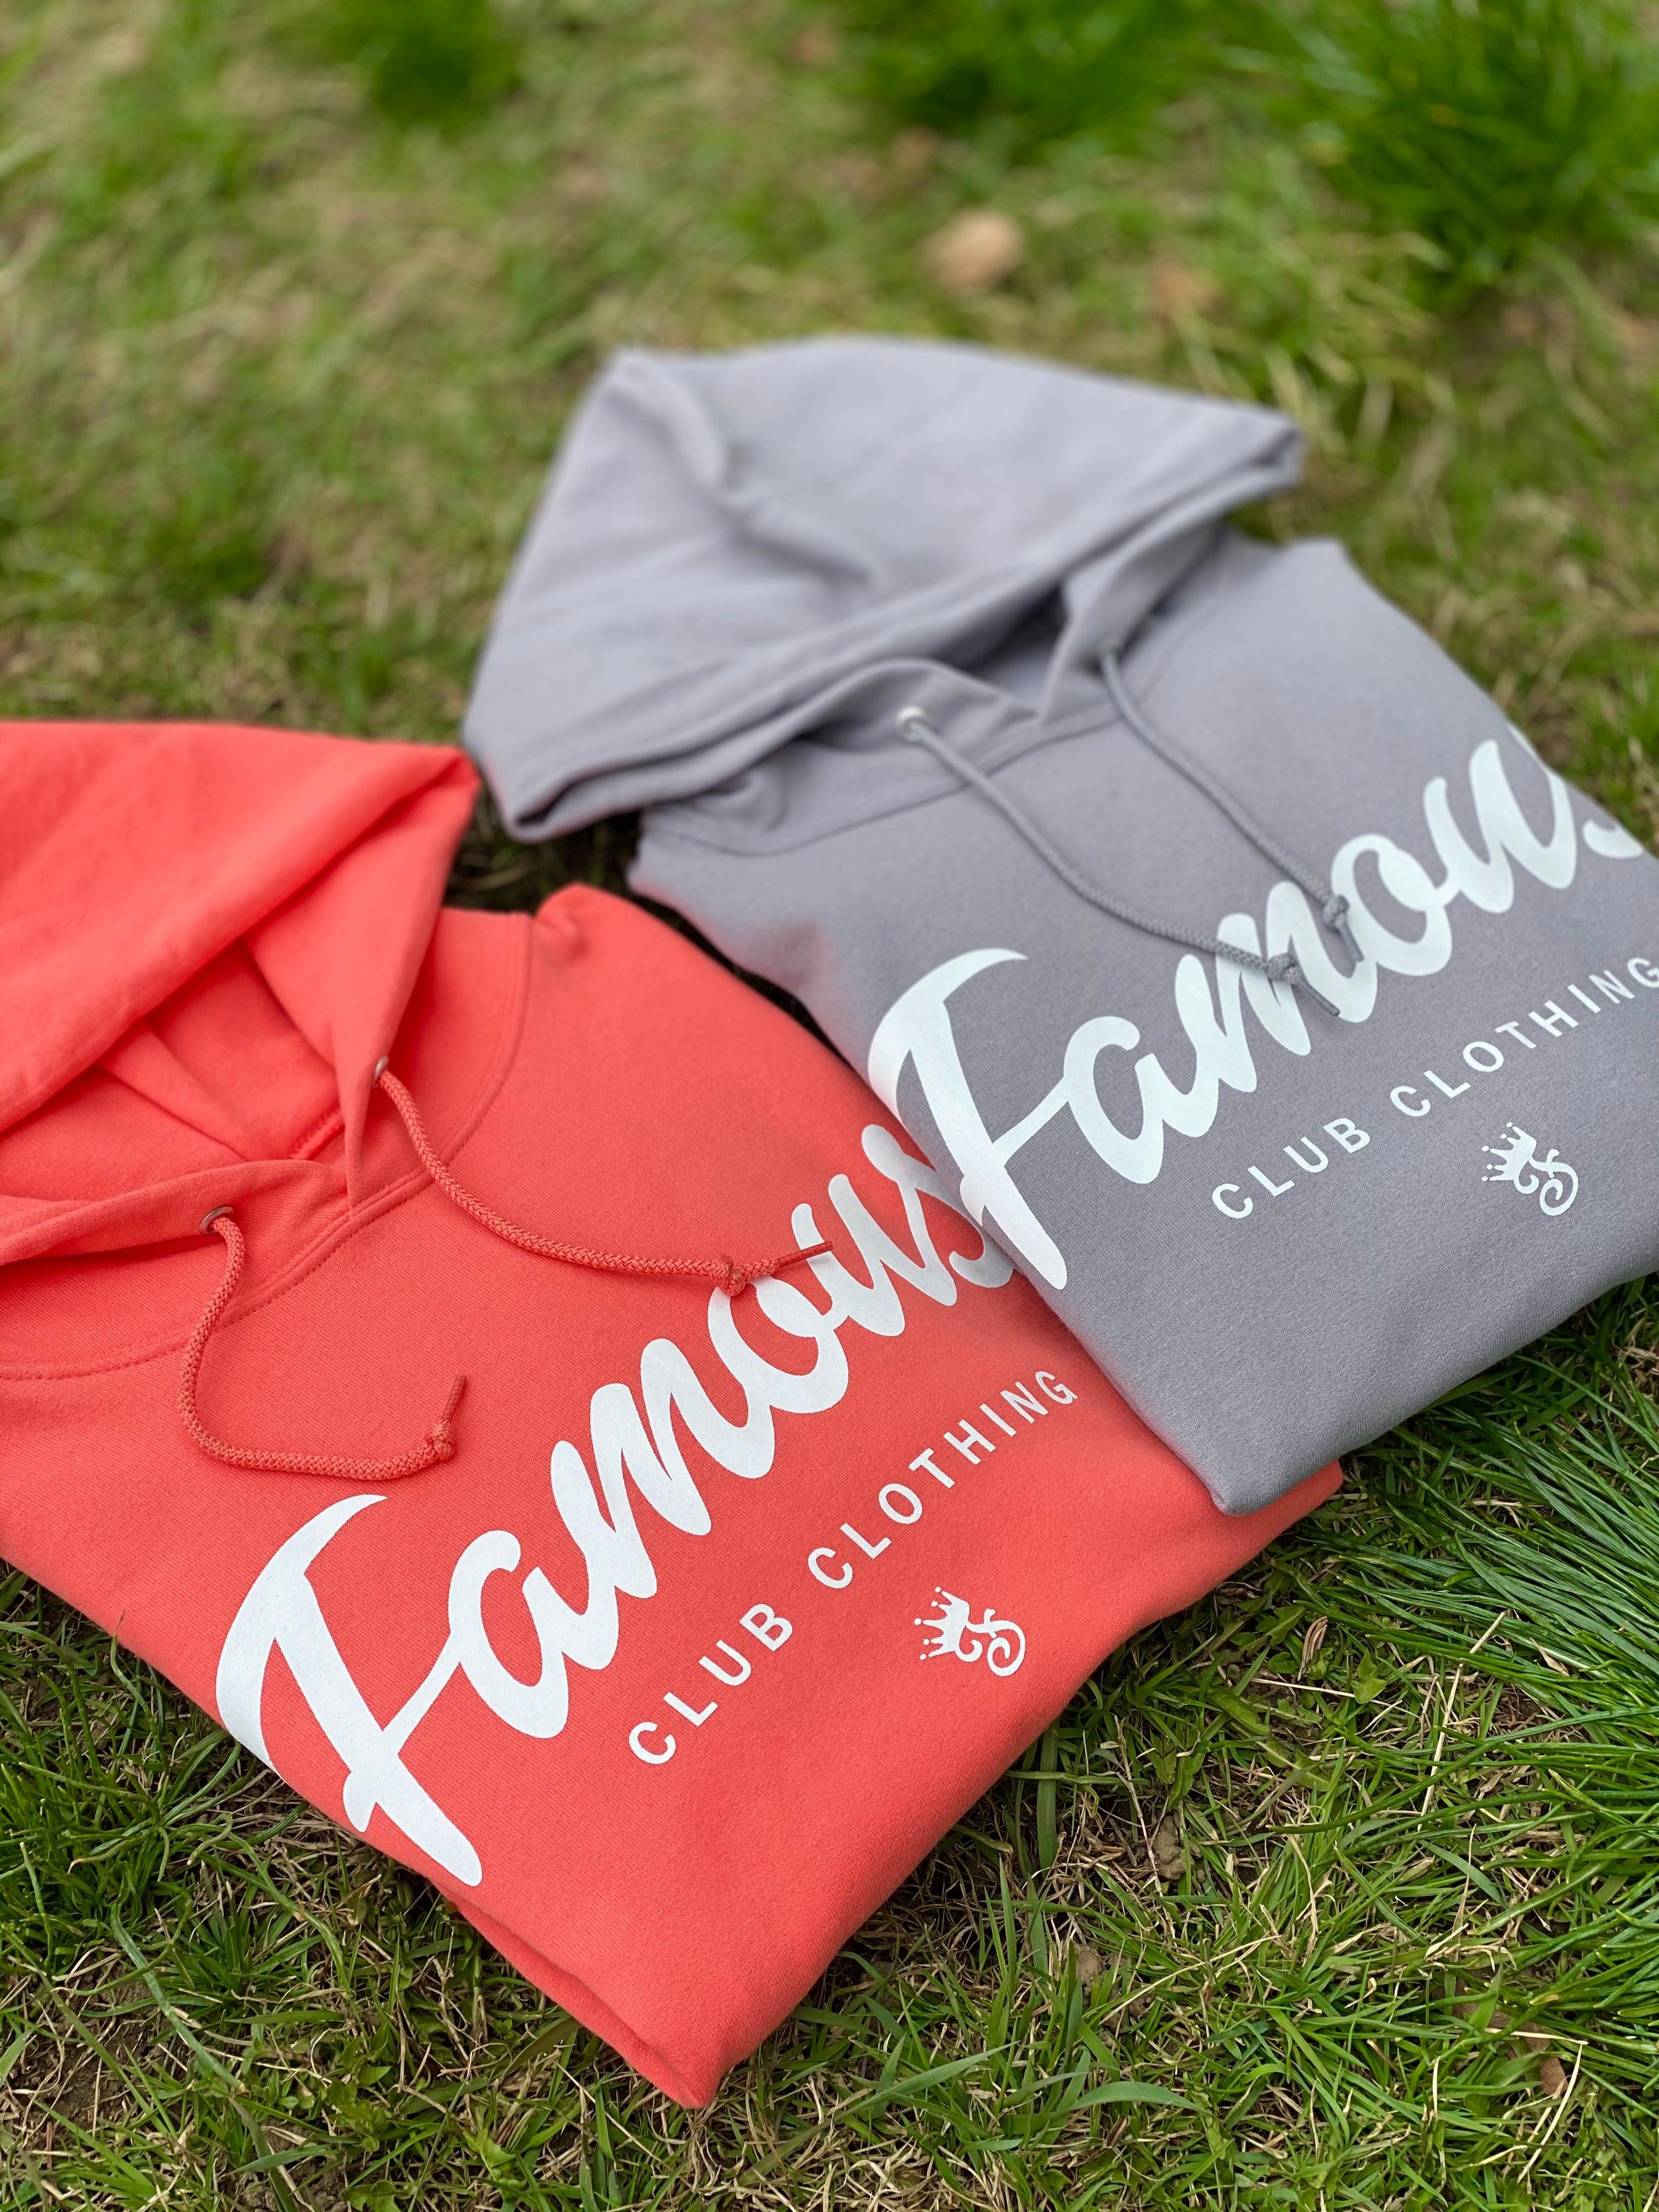 FAMOUS SCRIPT SALMON & OYSTERS - Famous Club Clothing